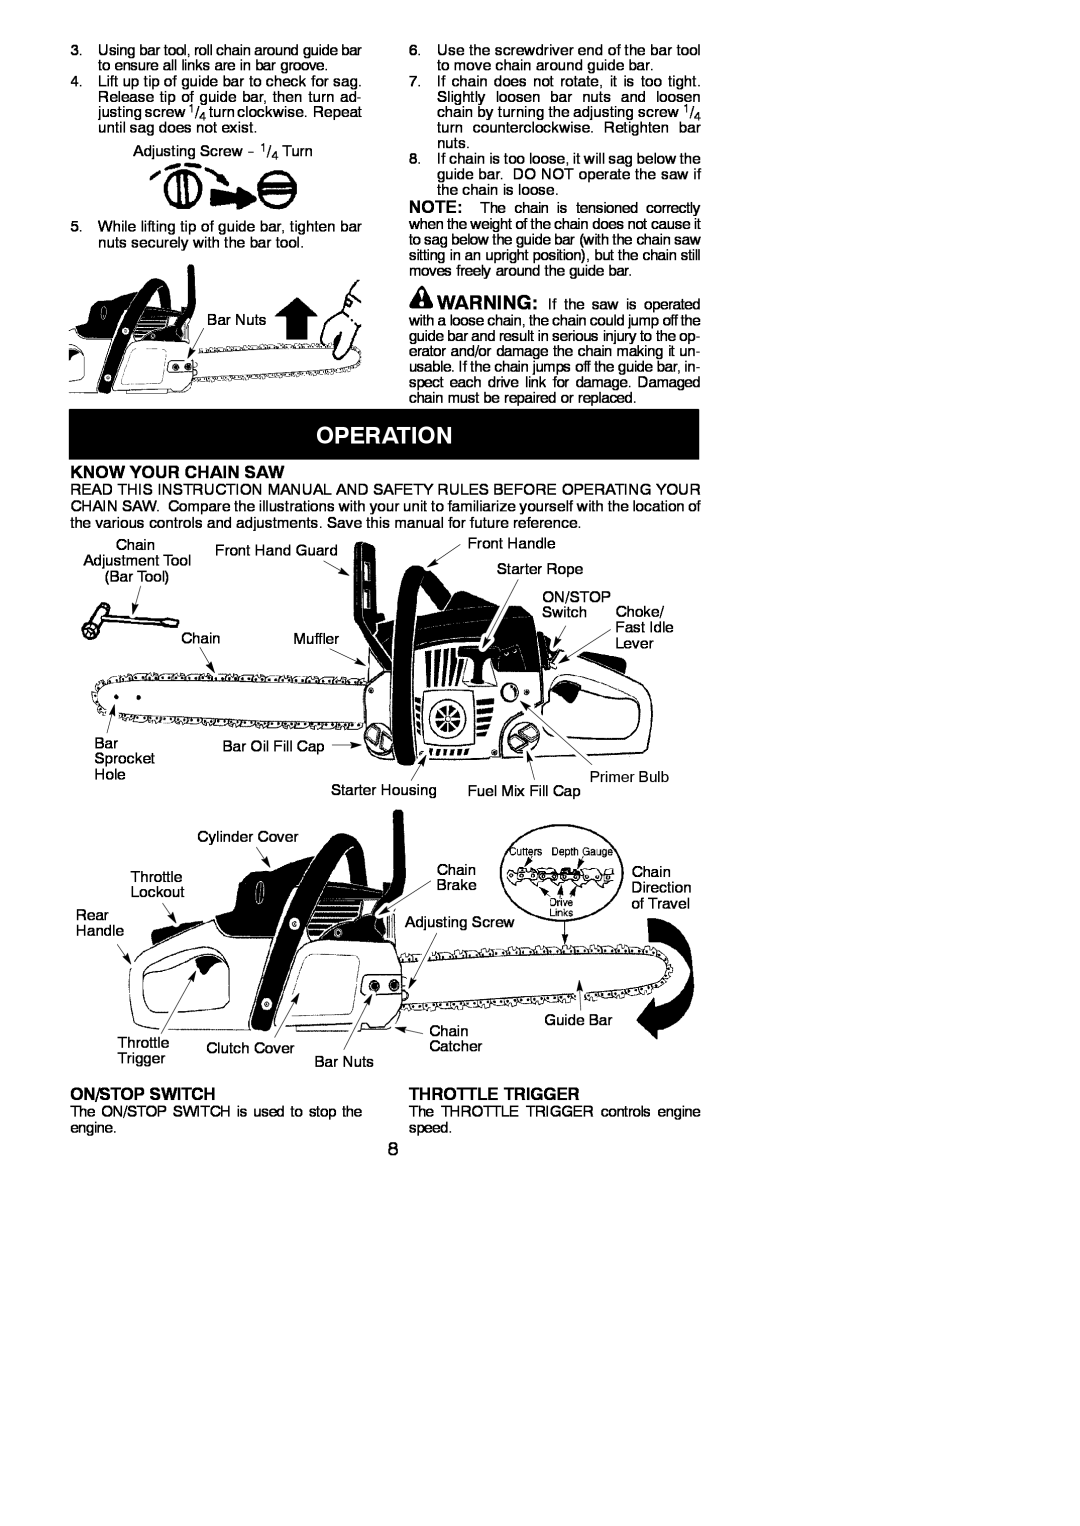 Poulan 966063001 instruction manual Operation, Know Your Chain Saw, On/Stop Switch, Throttle Trigger 